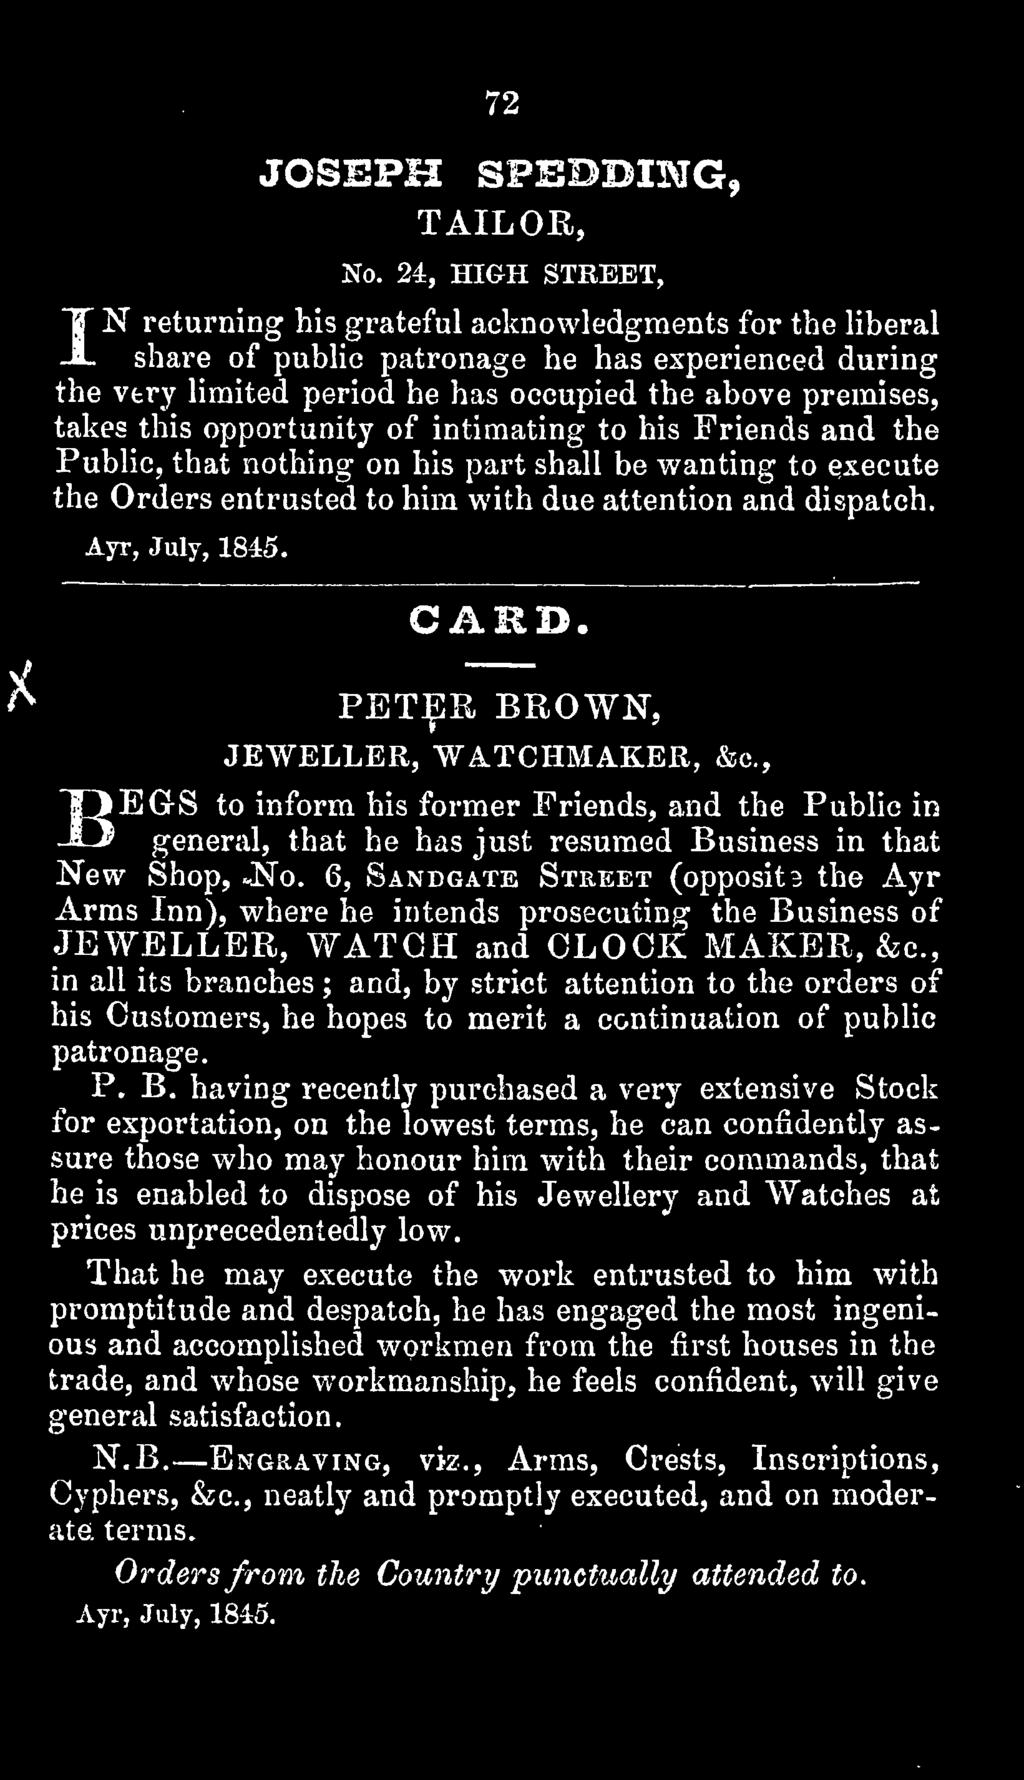 opportunity of intimating to his Friends and the Public, that nothing on his part shall be wanting to execute the Orders entrusted to him with due attention and dispatch. Ayr, July, 1845. OAHD.